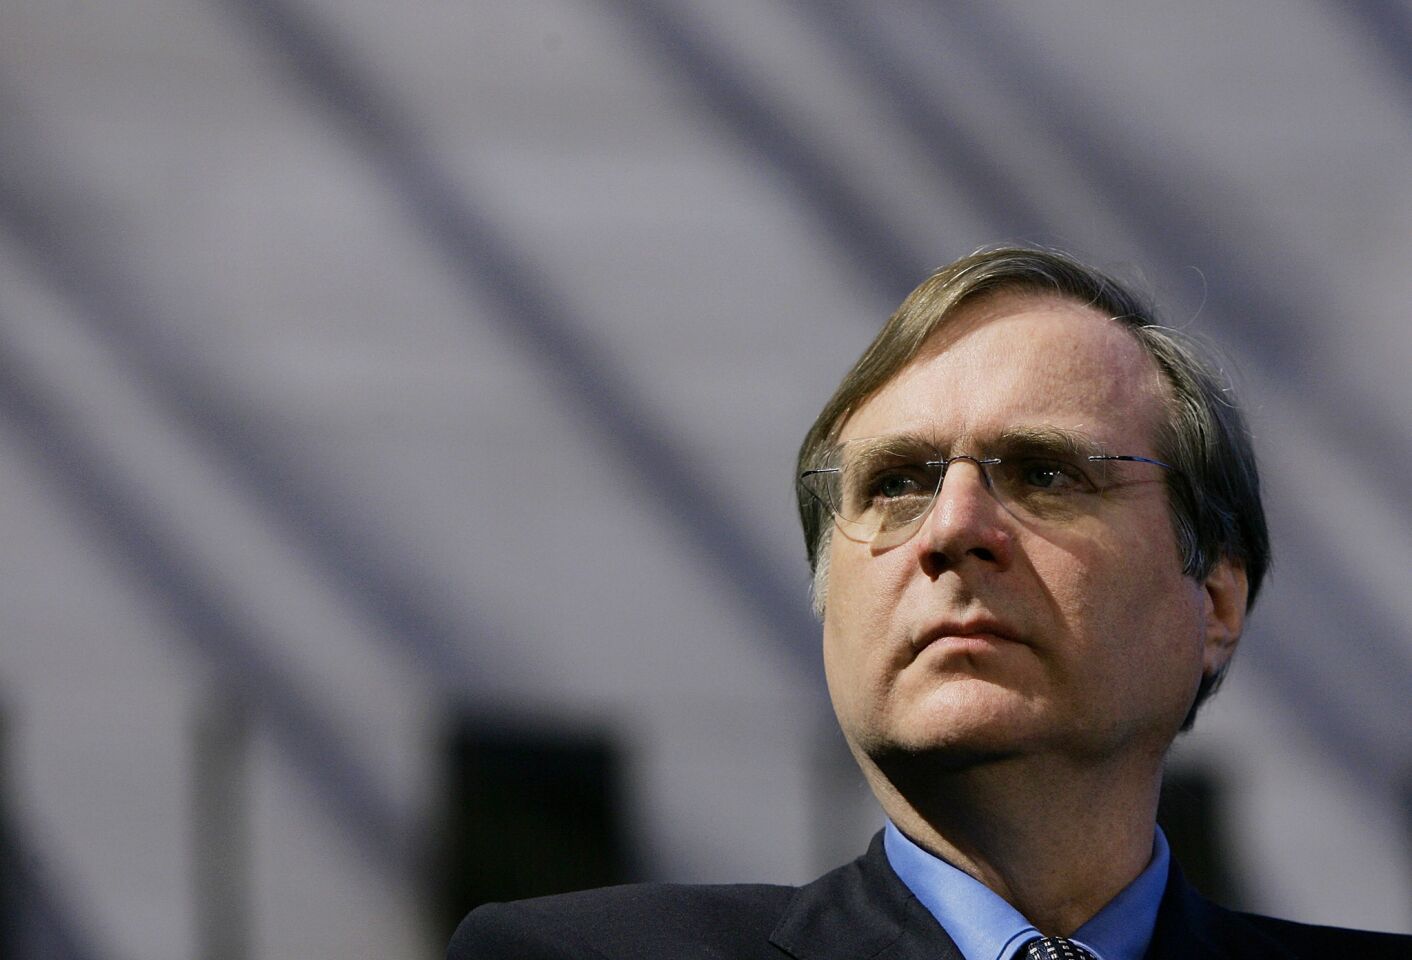 Paul Allen, founder of SpaceShipOne, at a news conference to mark the donation of SpaceShipOne to the National Air and Space Museum on Oct. 5, 2005, in Washington, D.C. SpaceShipOne was the first privately built and piloted vehicle to reach space.